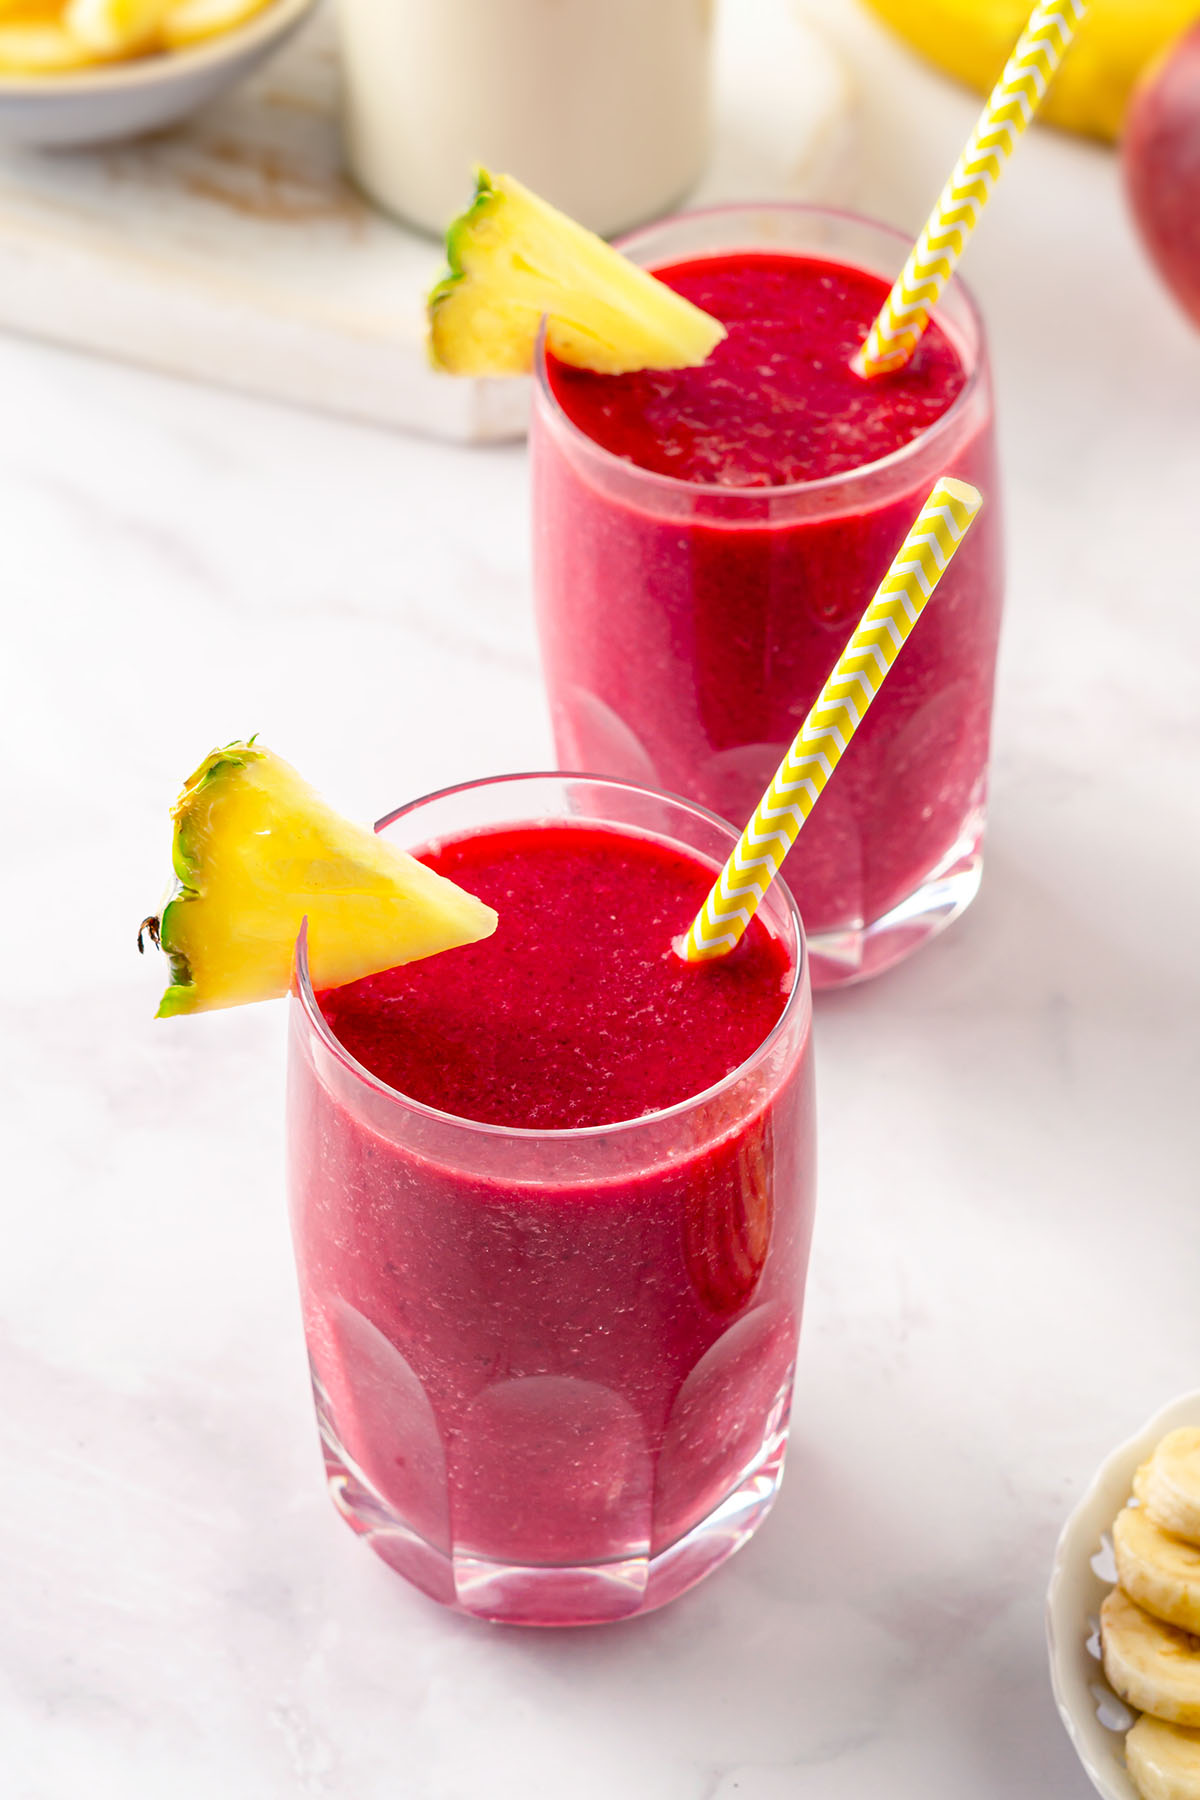 Two servings of beetroot pineapple smoothie